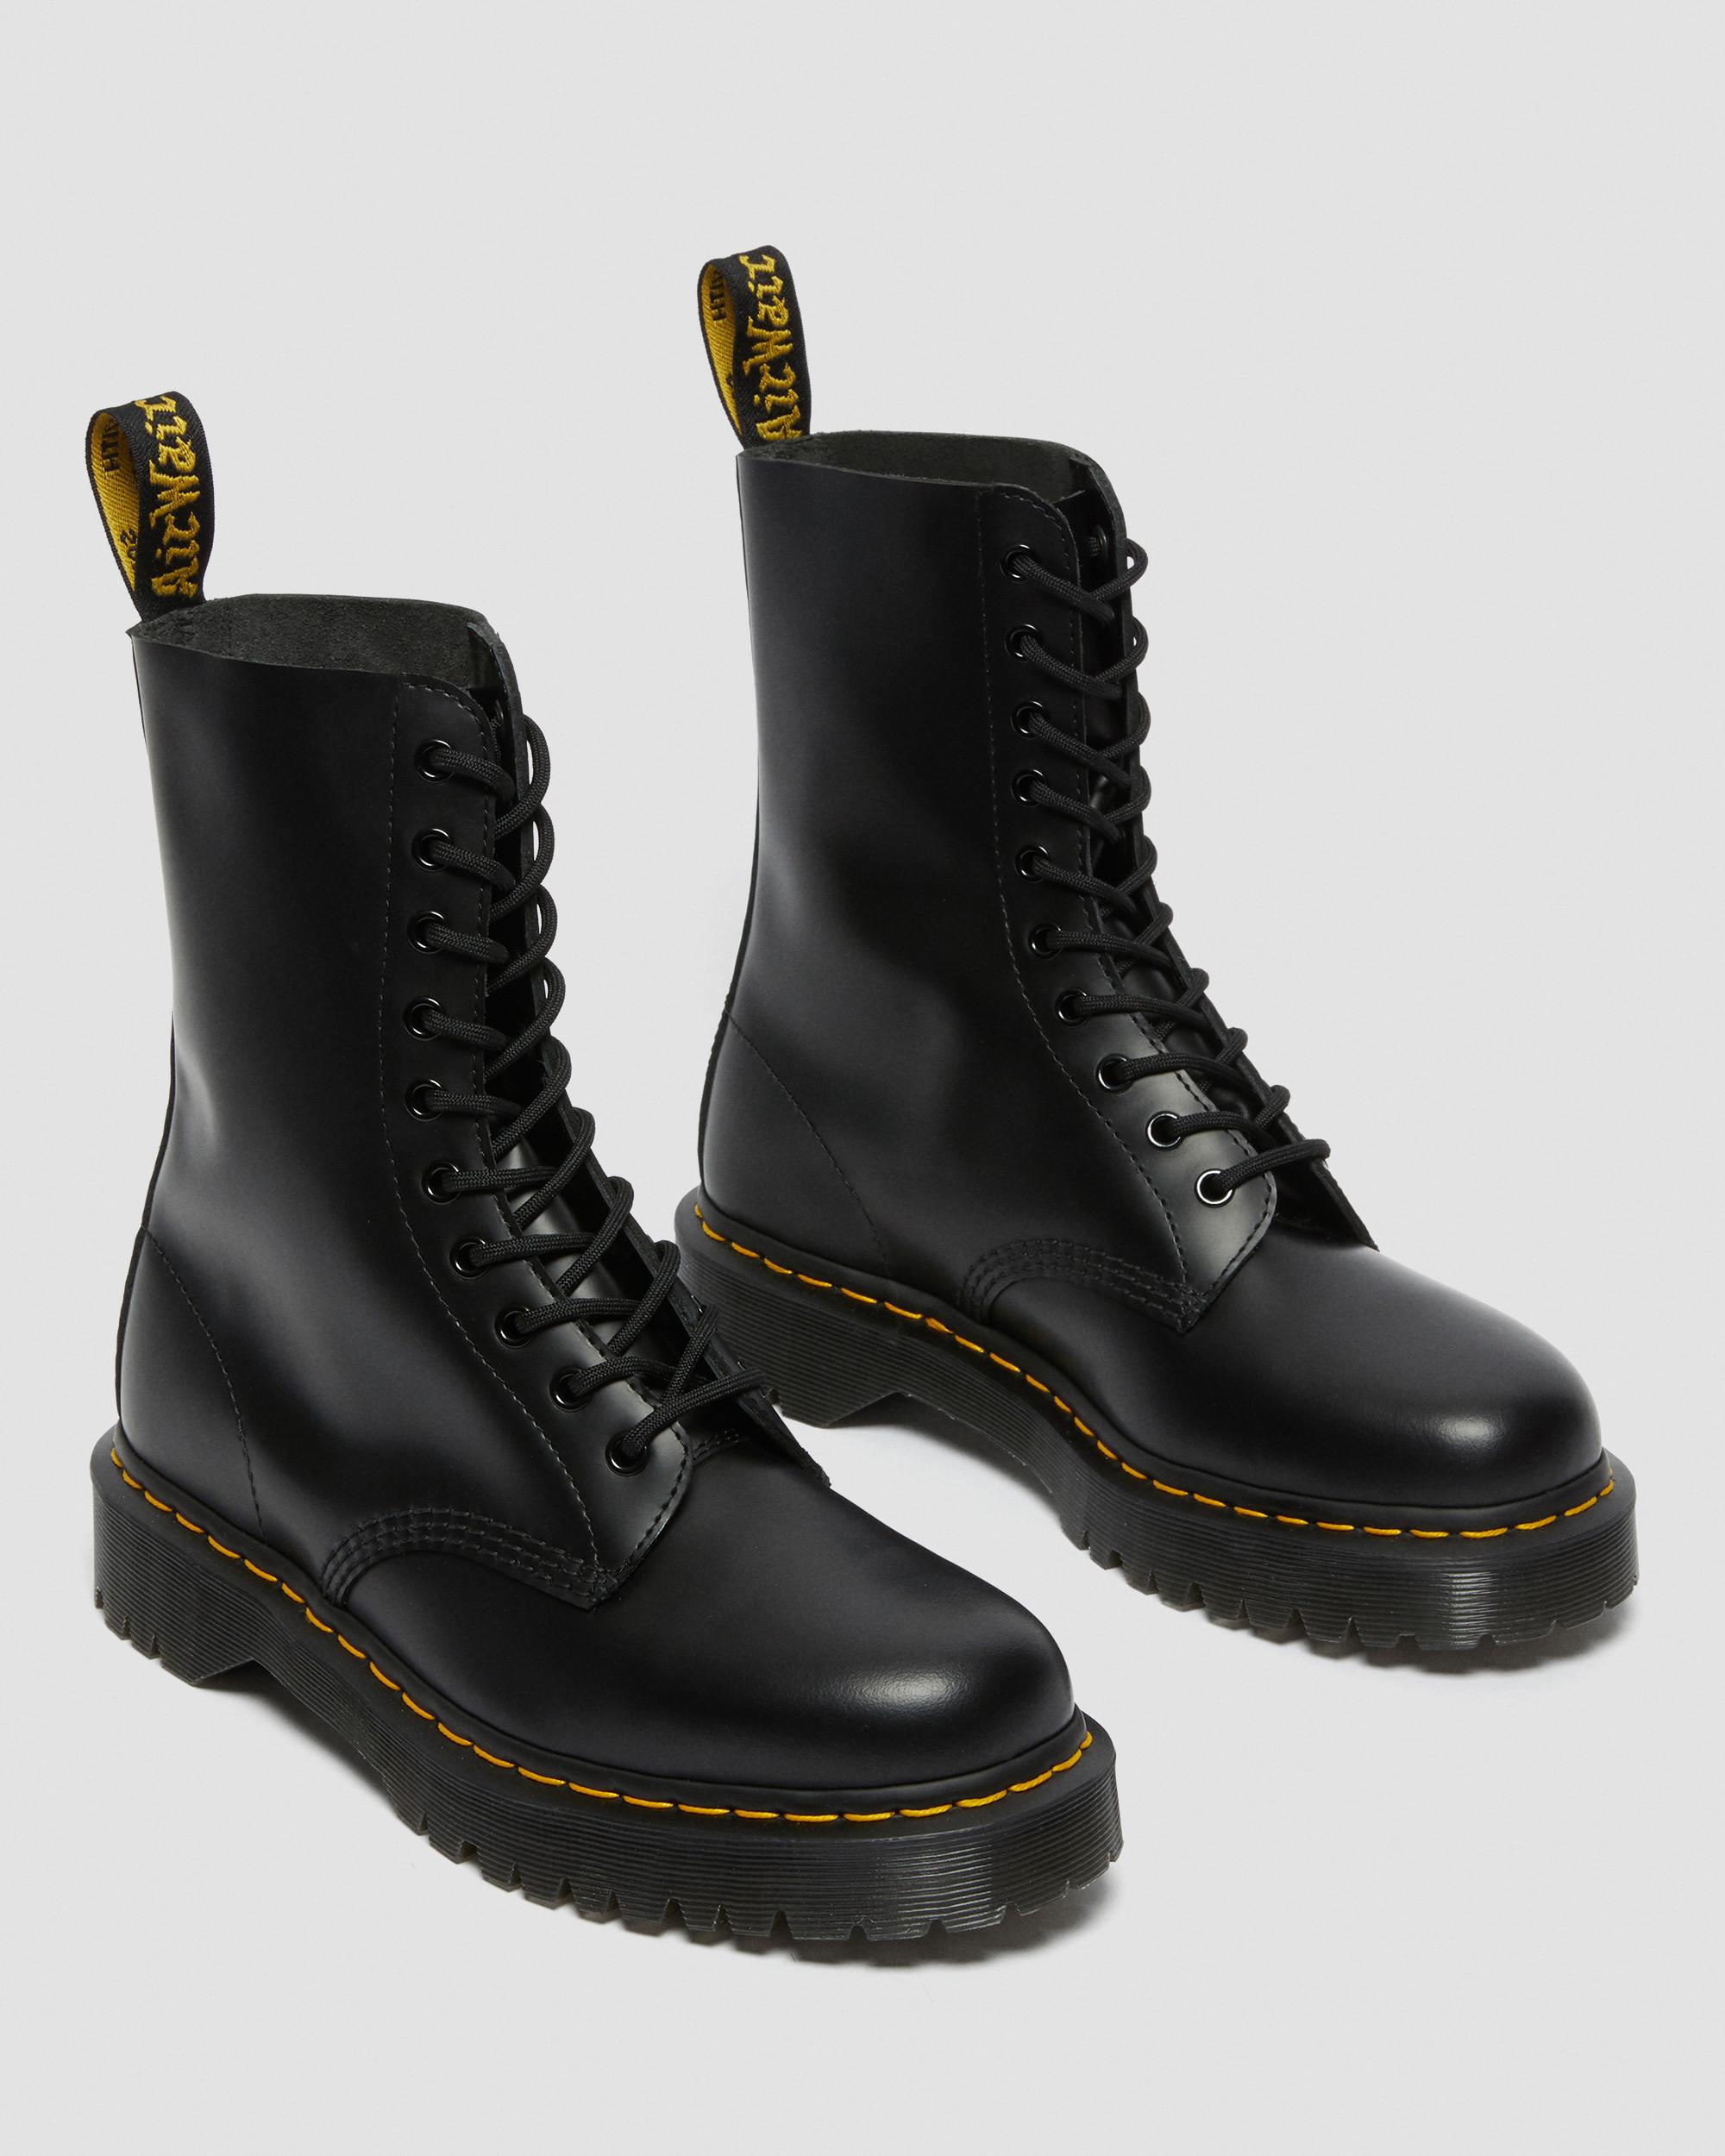 1490 BEX SMOOTH LEATHER MID CALF BOOTS | Dr. Martens Official